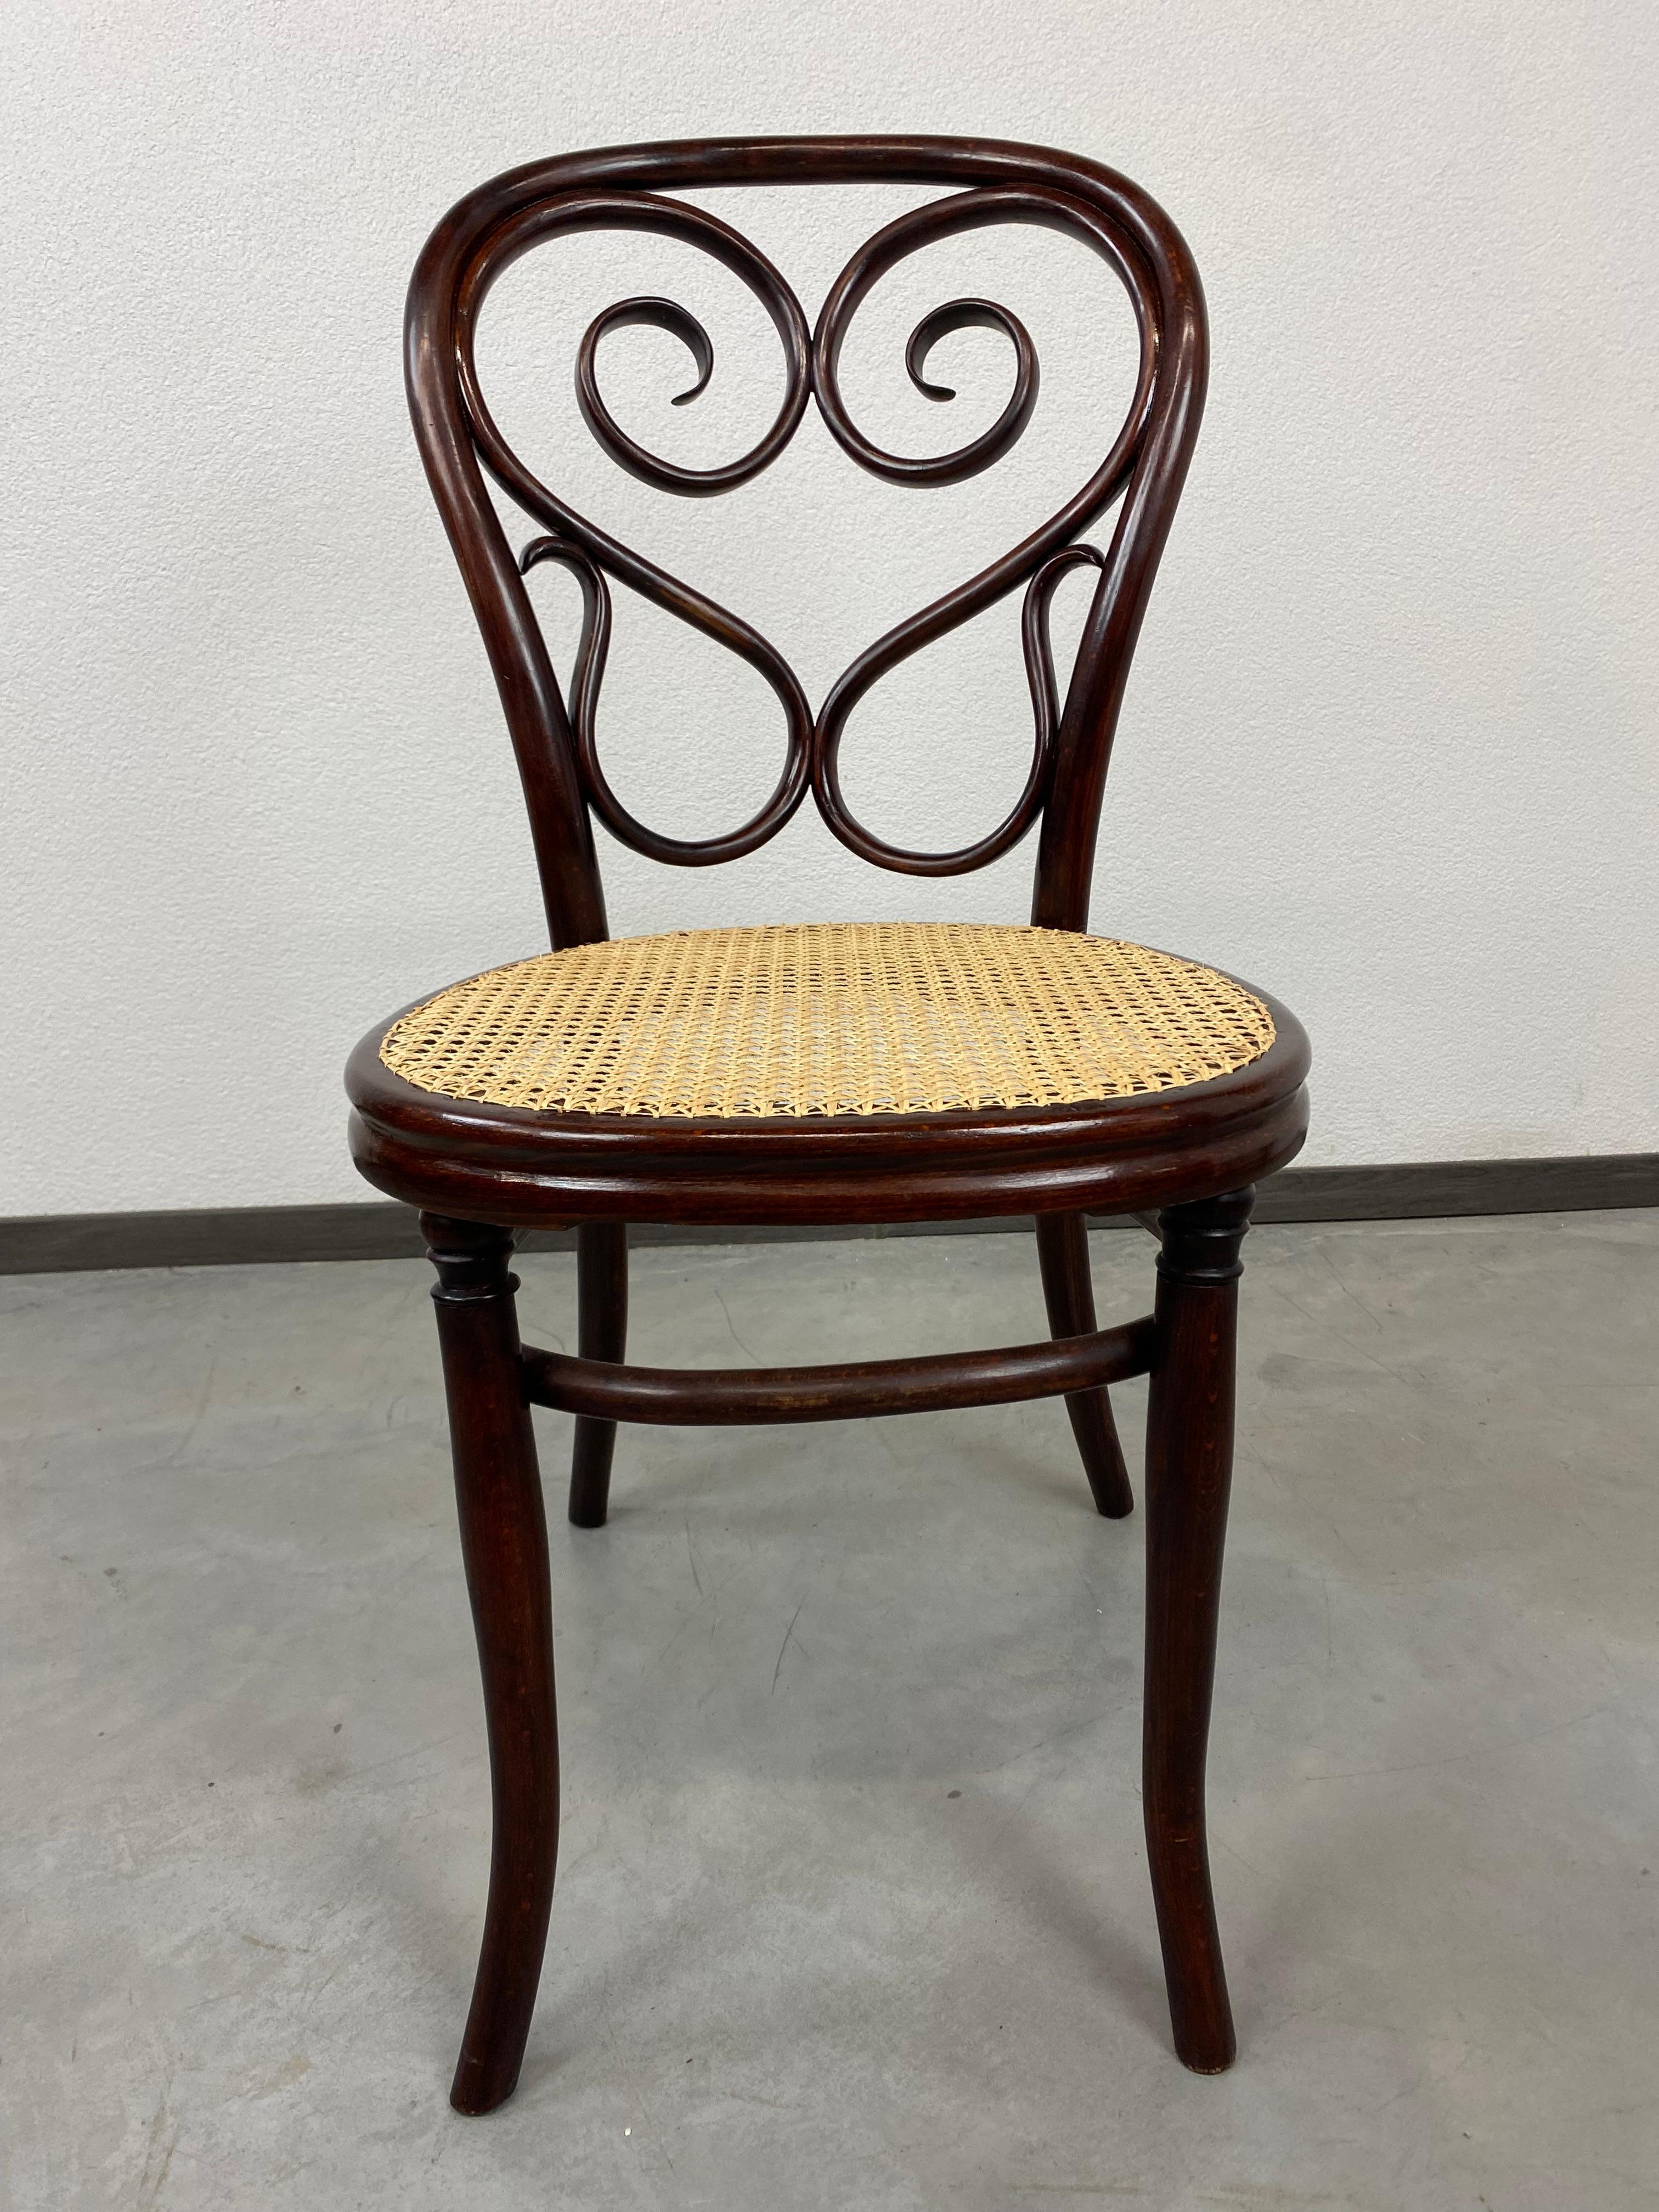 Thonet dining chair no.4 professionally stained and repolished.